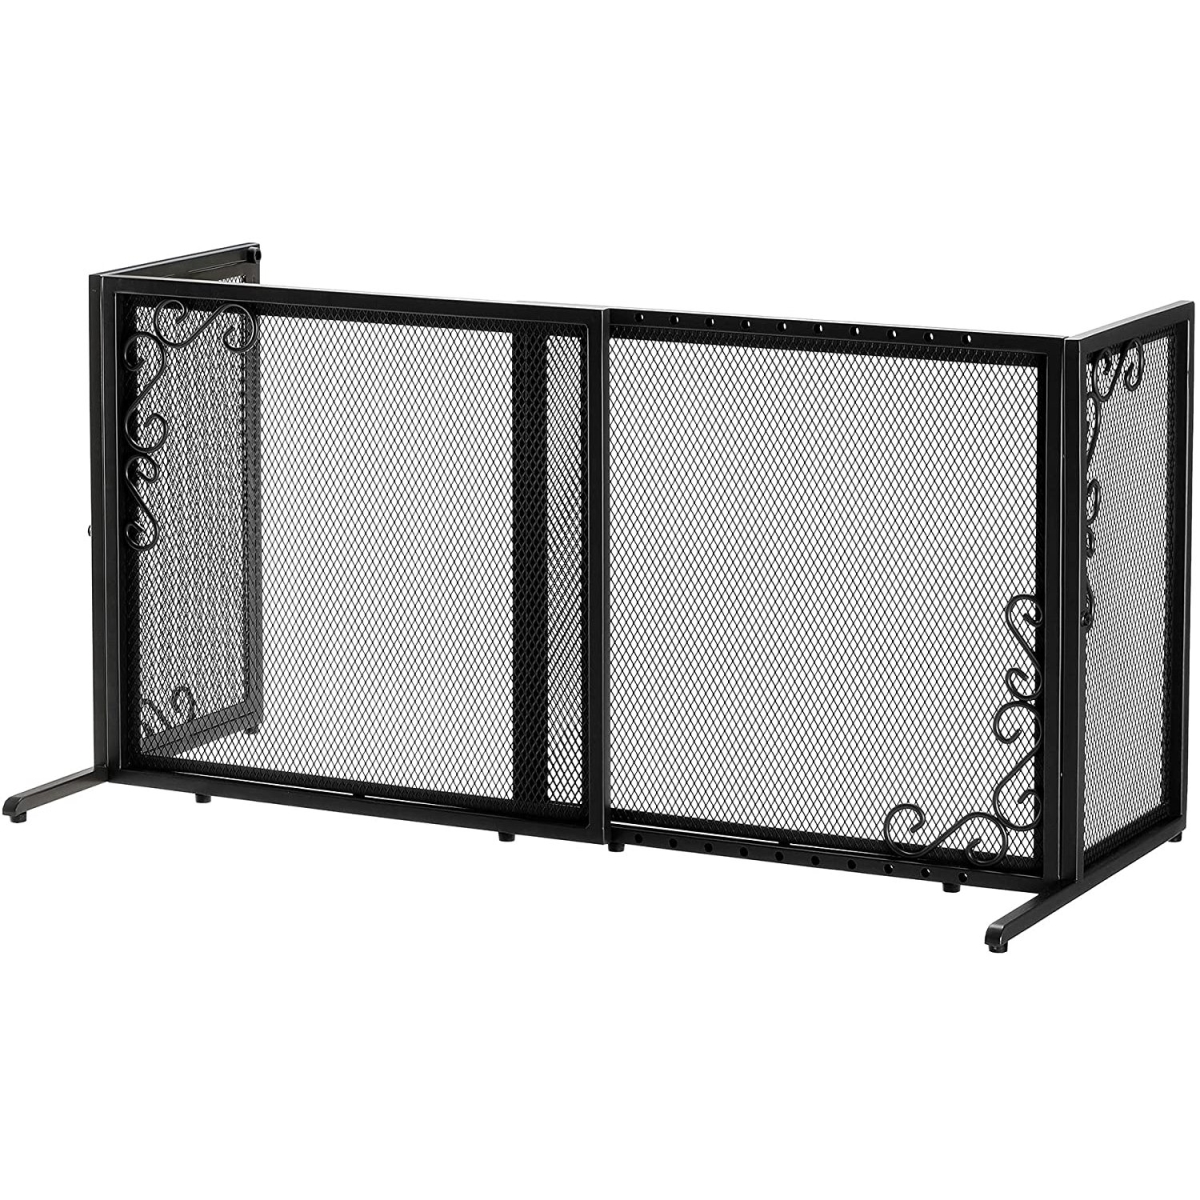 Picture of Richell 94944 26-40 x 18 x 20 in. Freestanding Metal Mesh Pet Gate - Black - Small